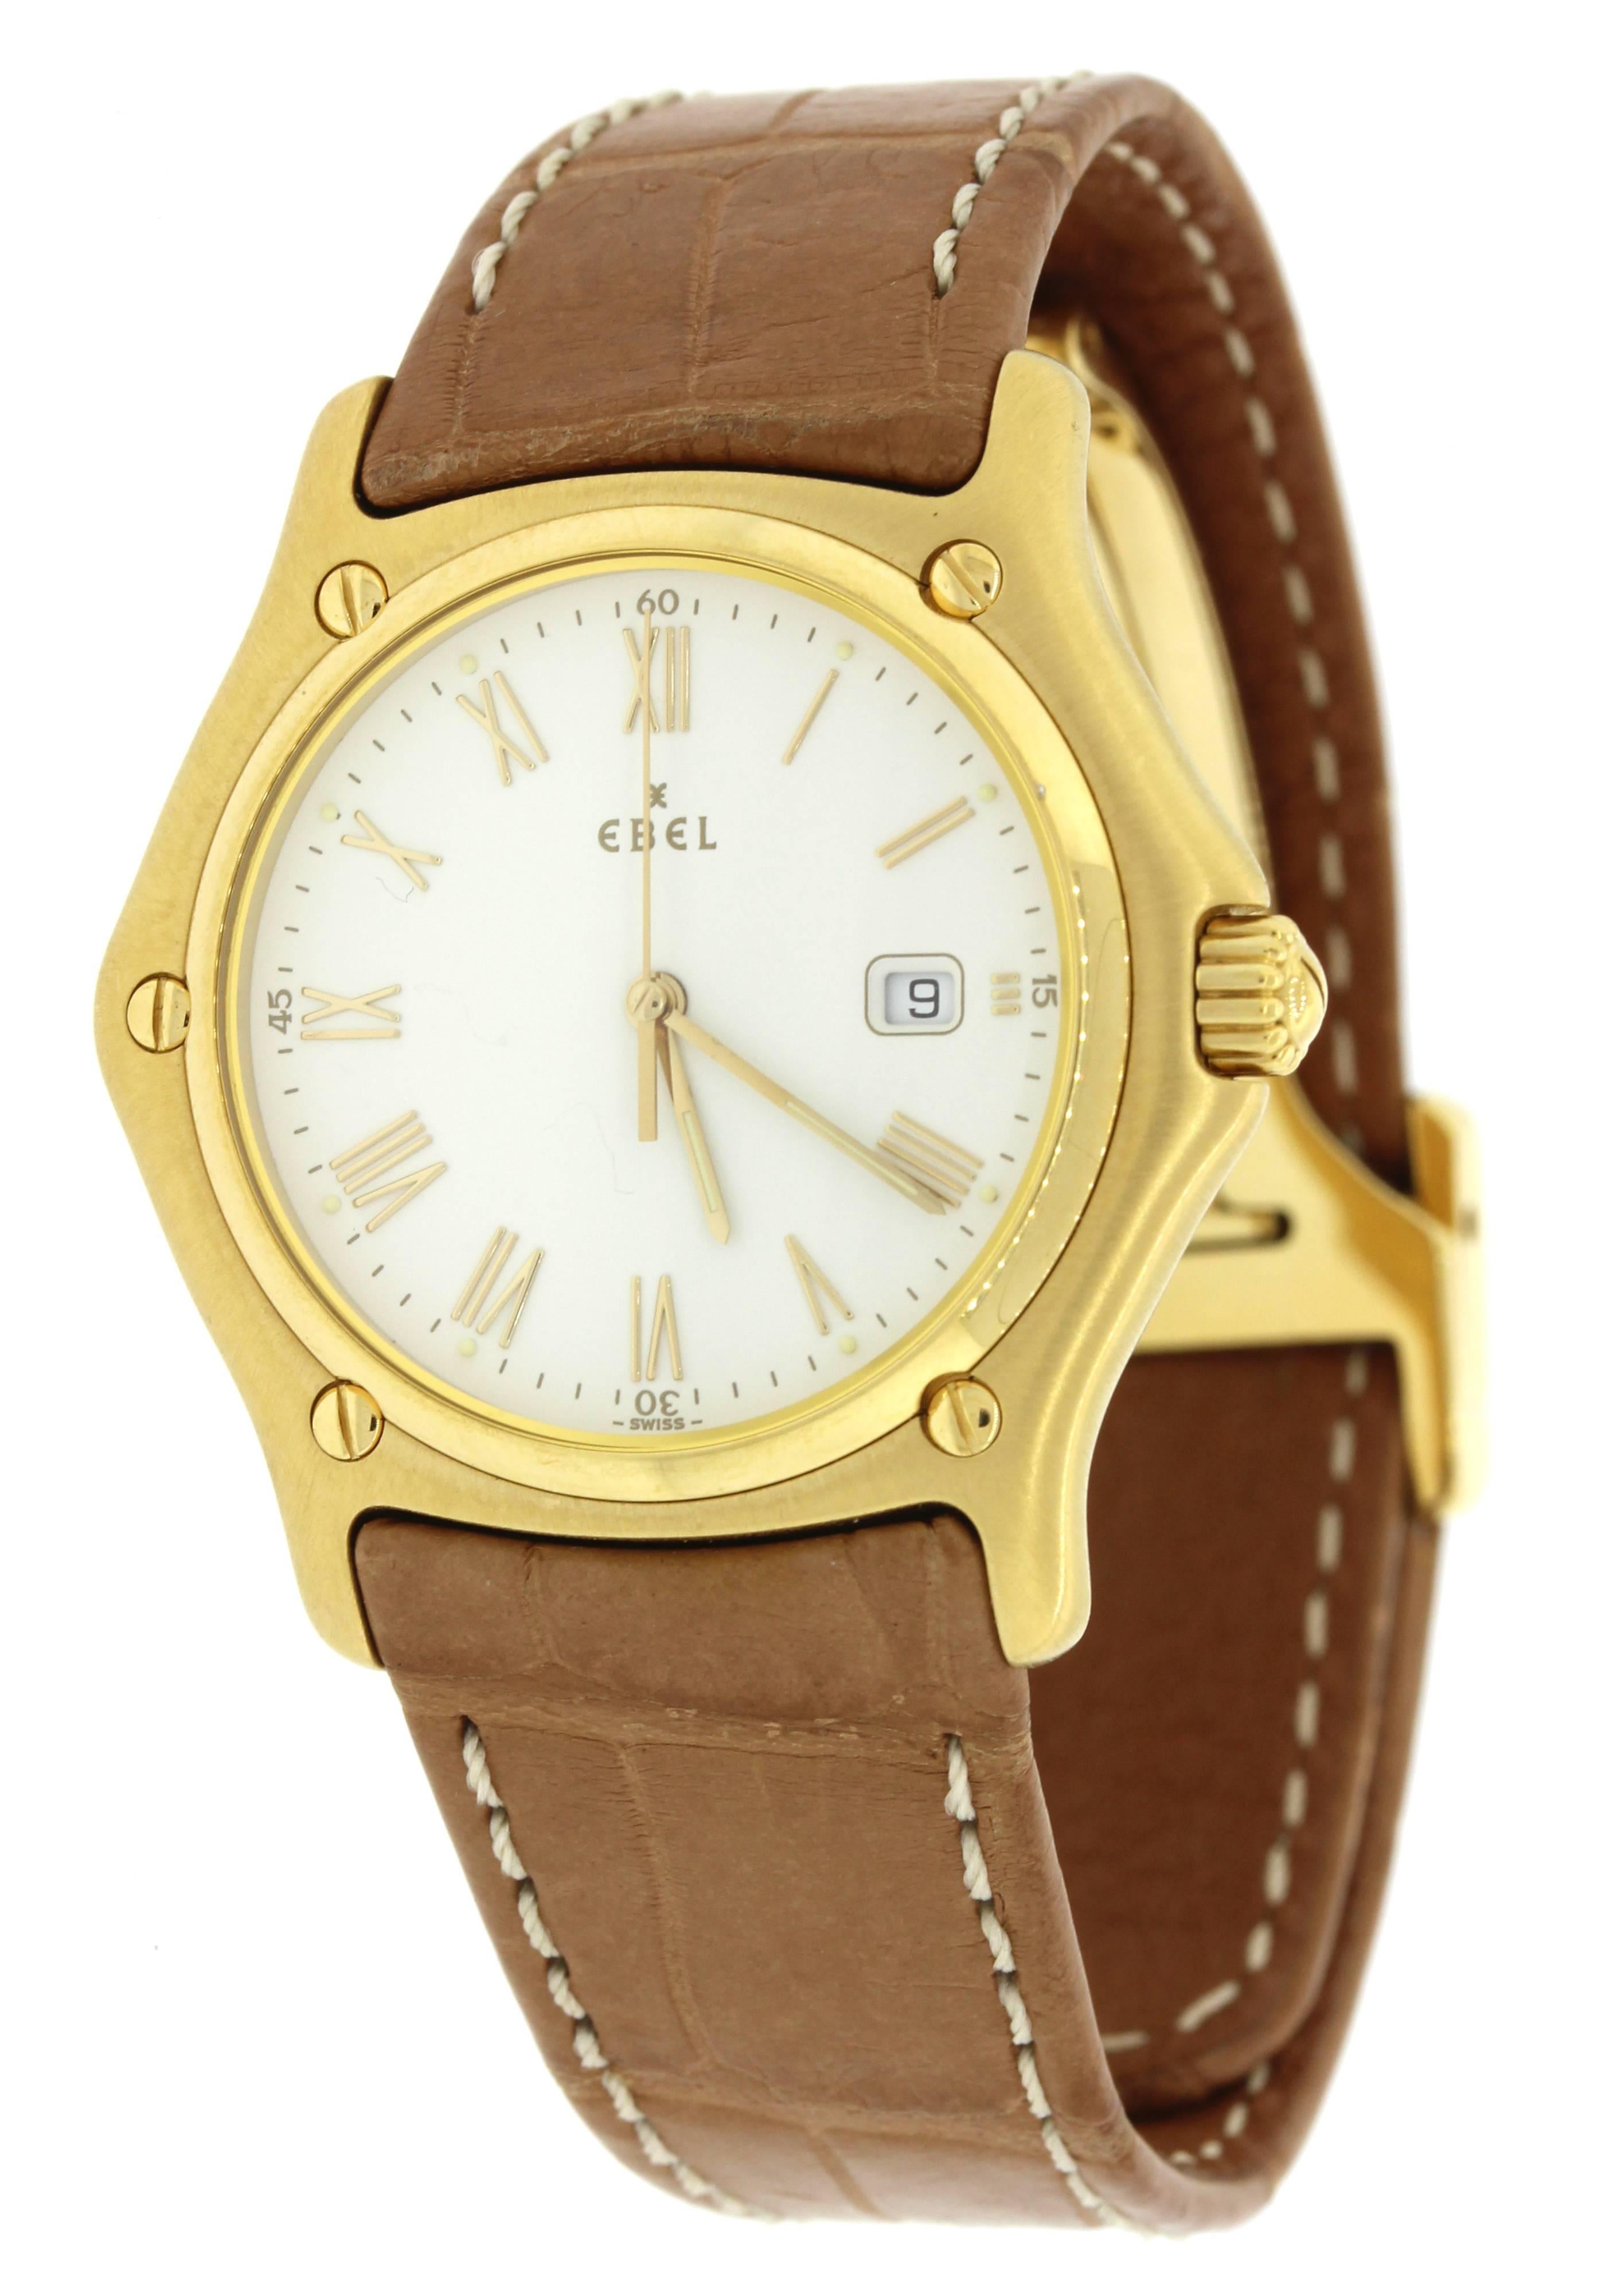 Ebel 1911 18k Yellow Gold 34mm White Roman Dial Quartz Watch 887902
	 
Brand 	Ebel
Model 	1911
Serial # 	74105***

Ref # 	887902
Gender 	Men's

Metal 	Solid 18k yellow gold
Case Size 	34mm
Wrist Size 	Will fit up to a 7.5